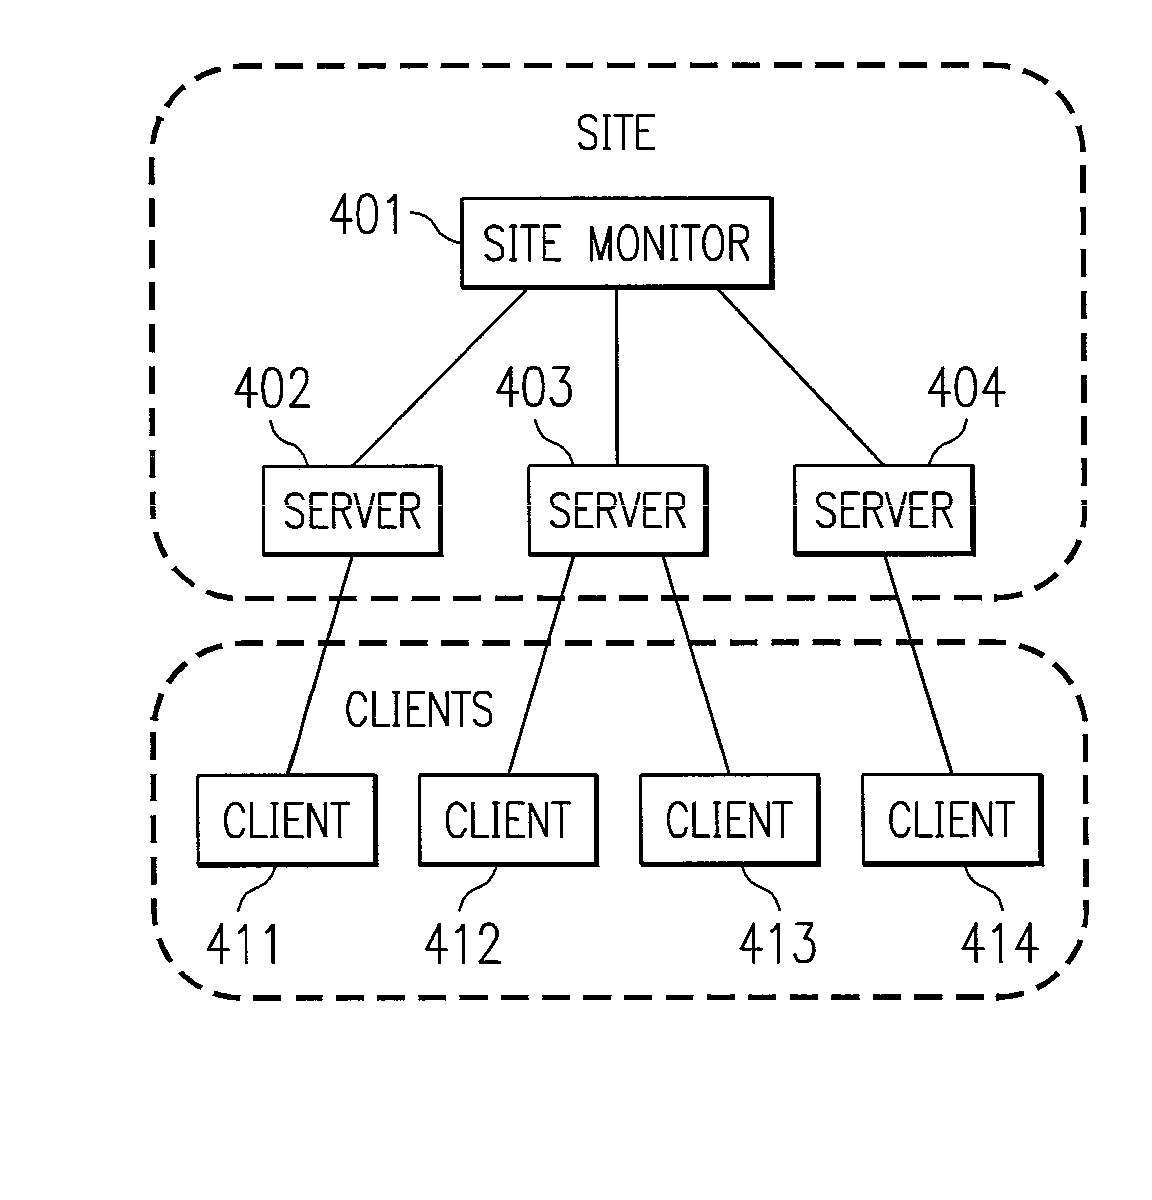 Synthetic transaction monitor with replay capability